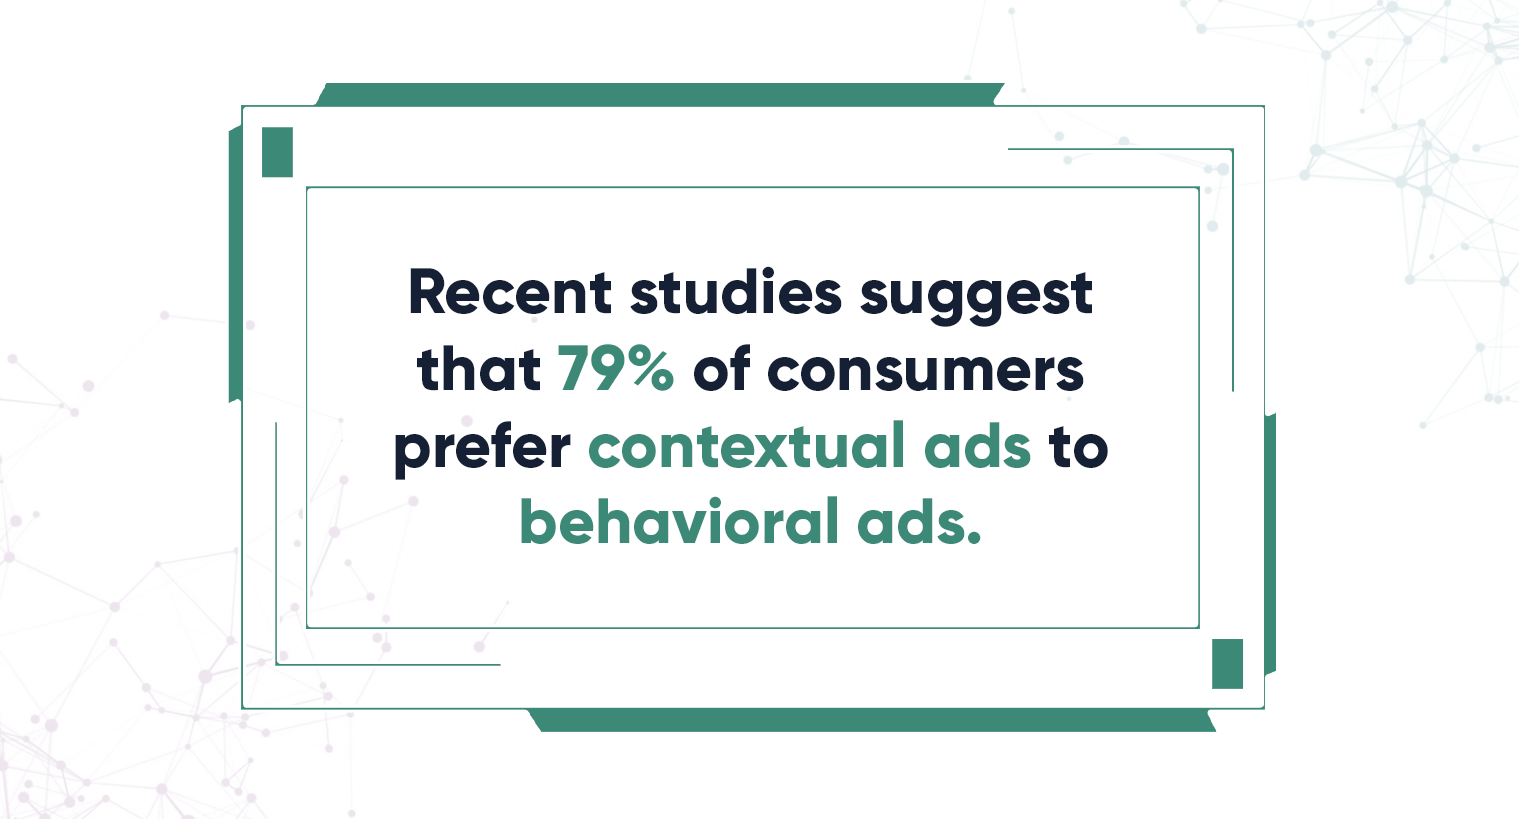 79% consumers prefer contextual ads to behavioral ads